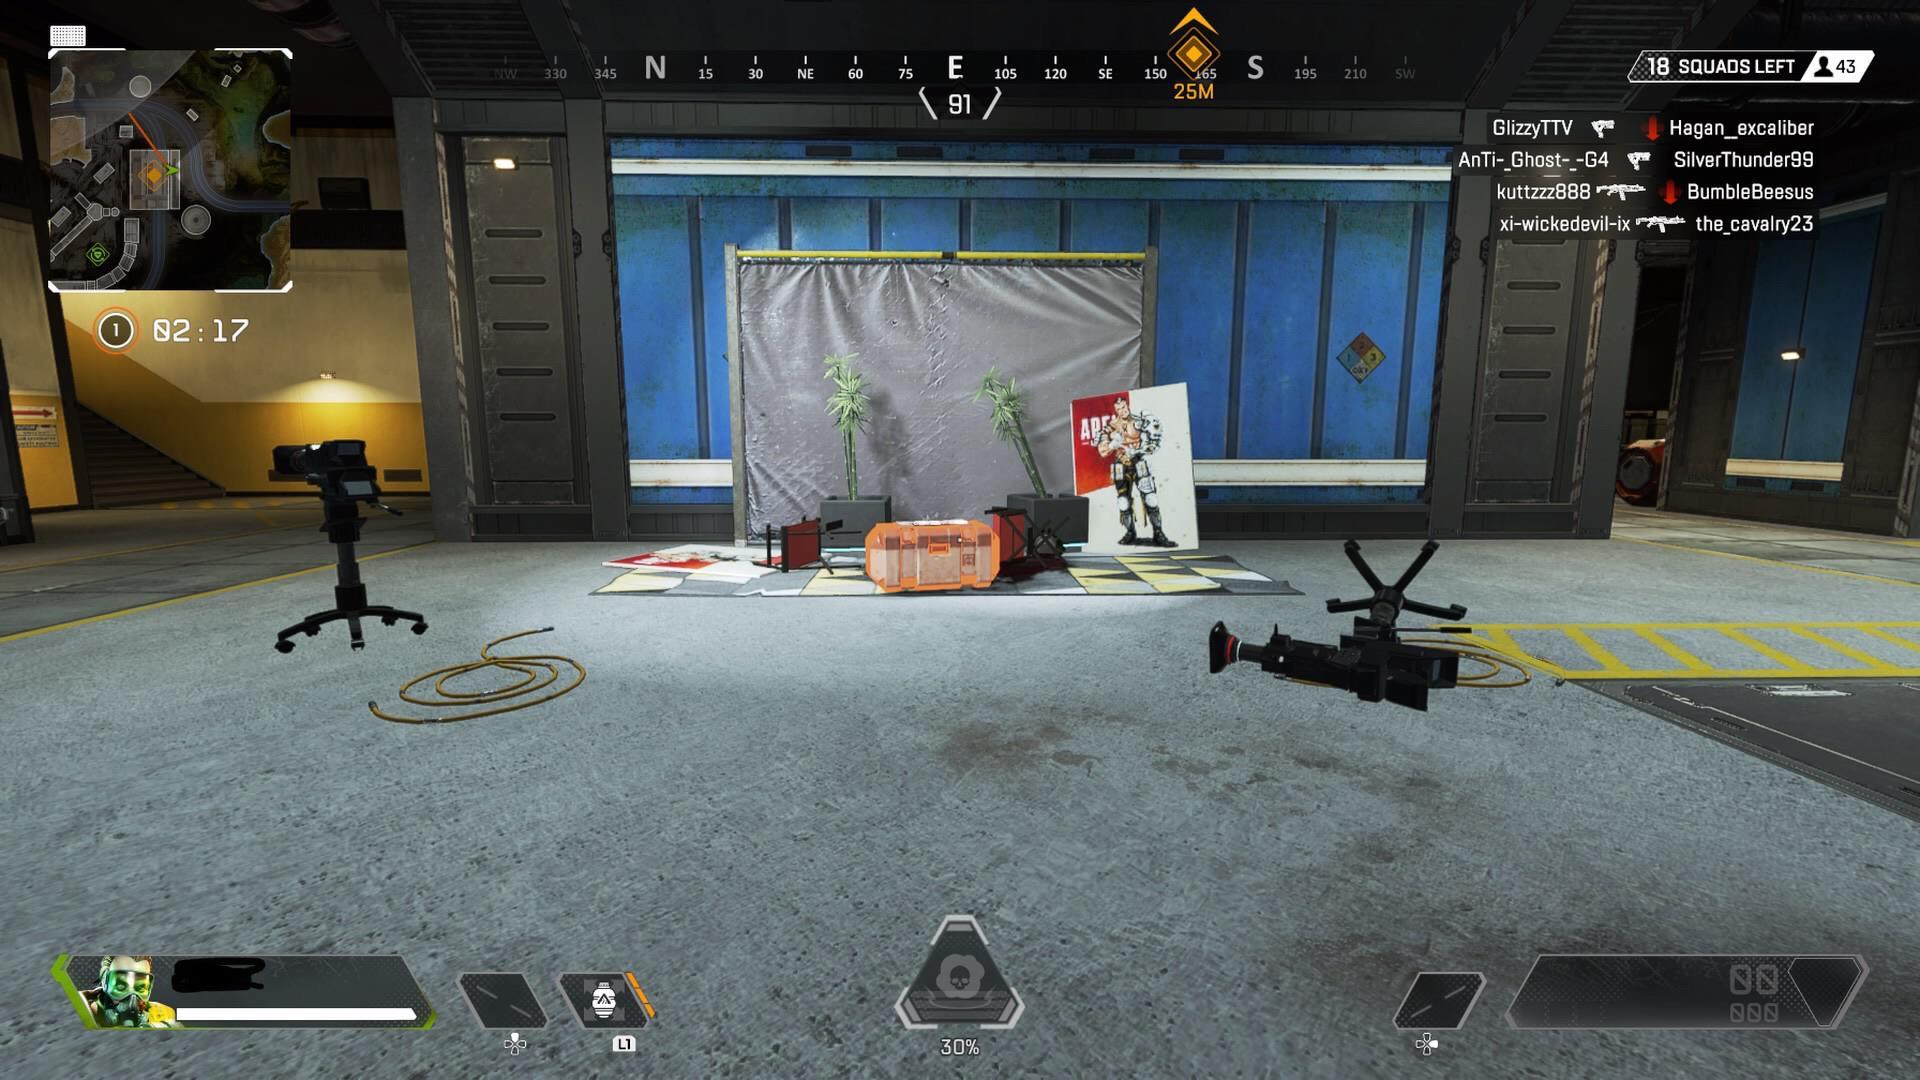 The set where Forge was attacked in Apex Legends.